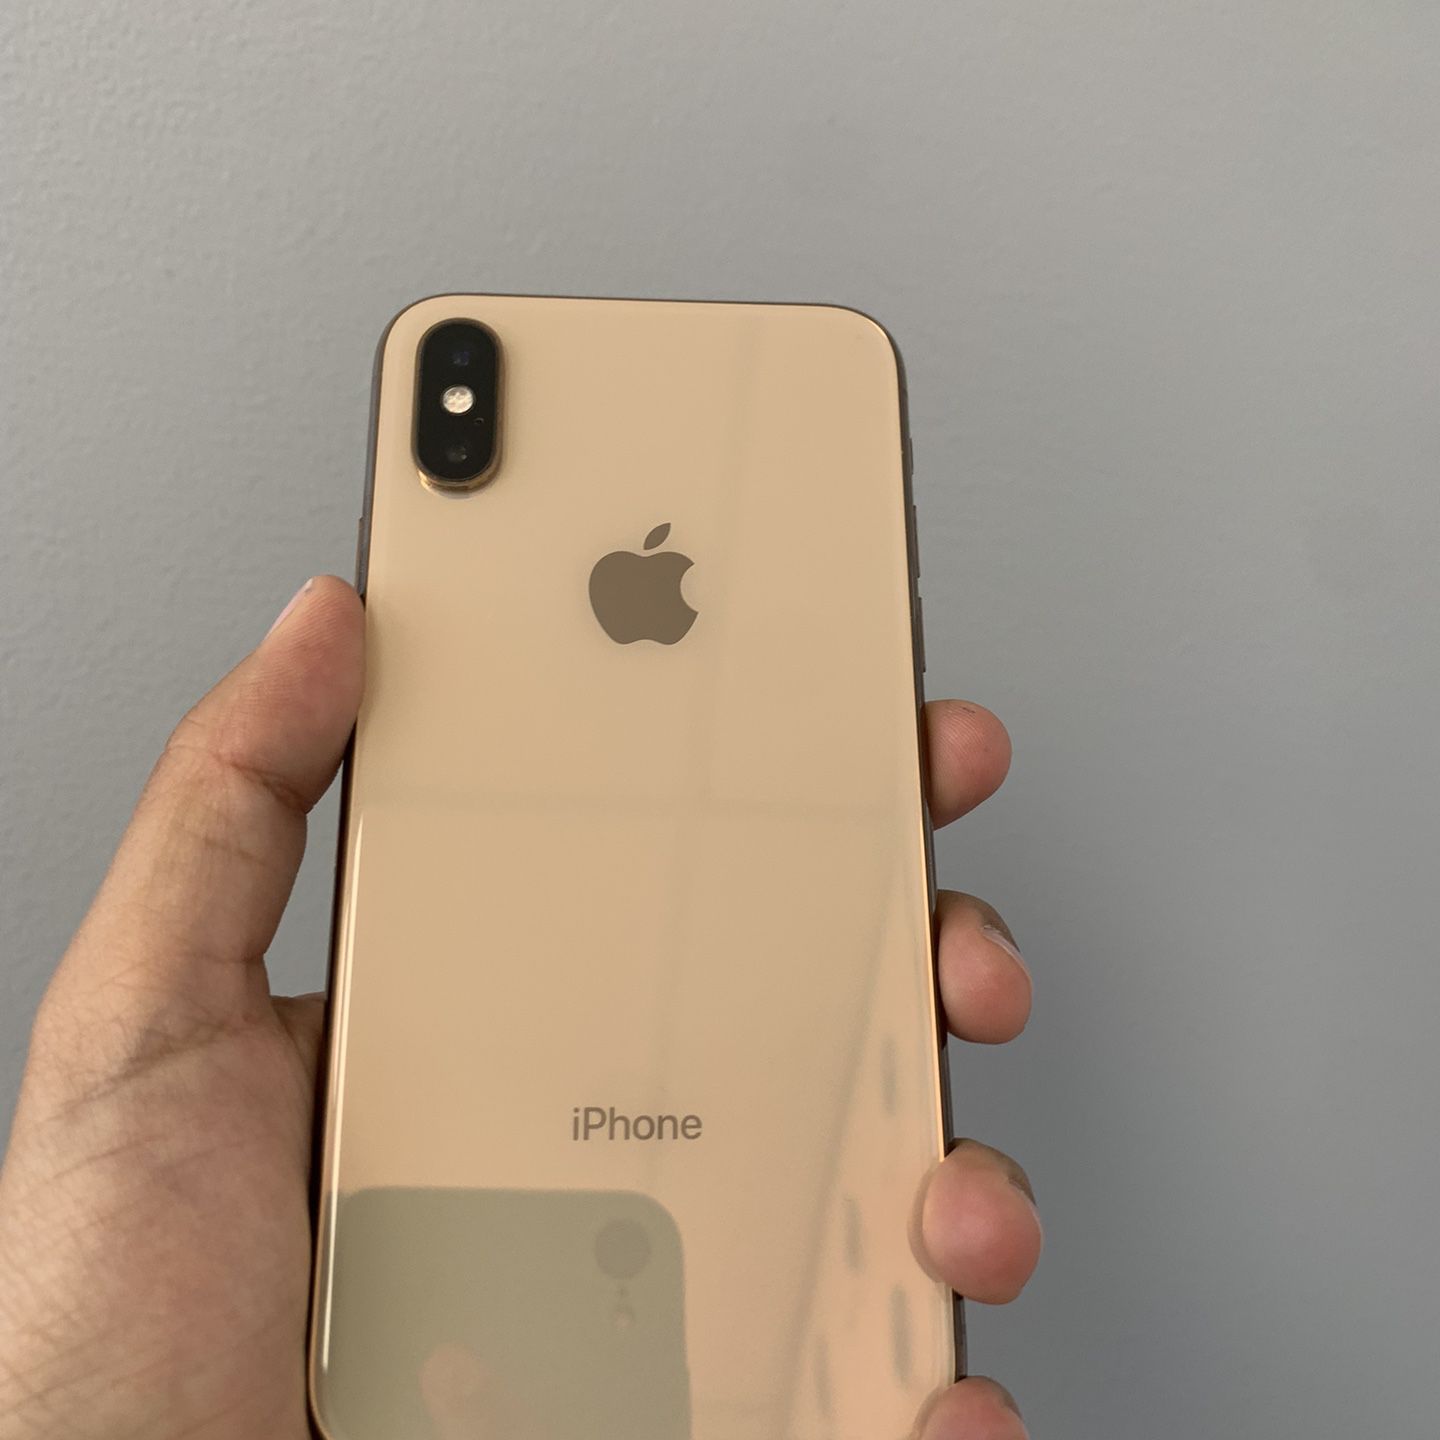 ⚫️📱 iPhone XS 64 GB Unlocked BH77% 🔋 Case And Headphones For Free ☑️👌🏻